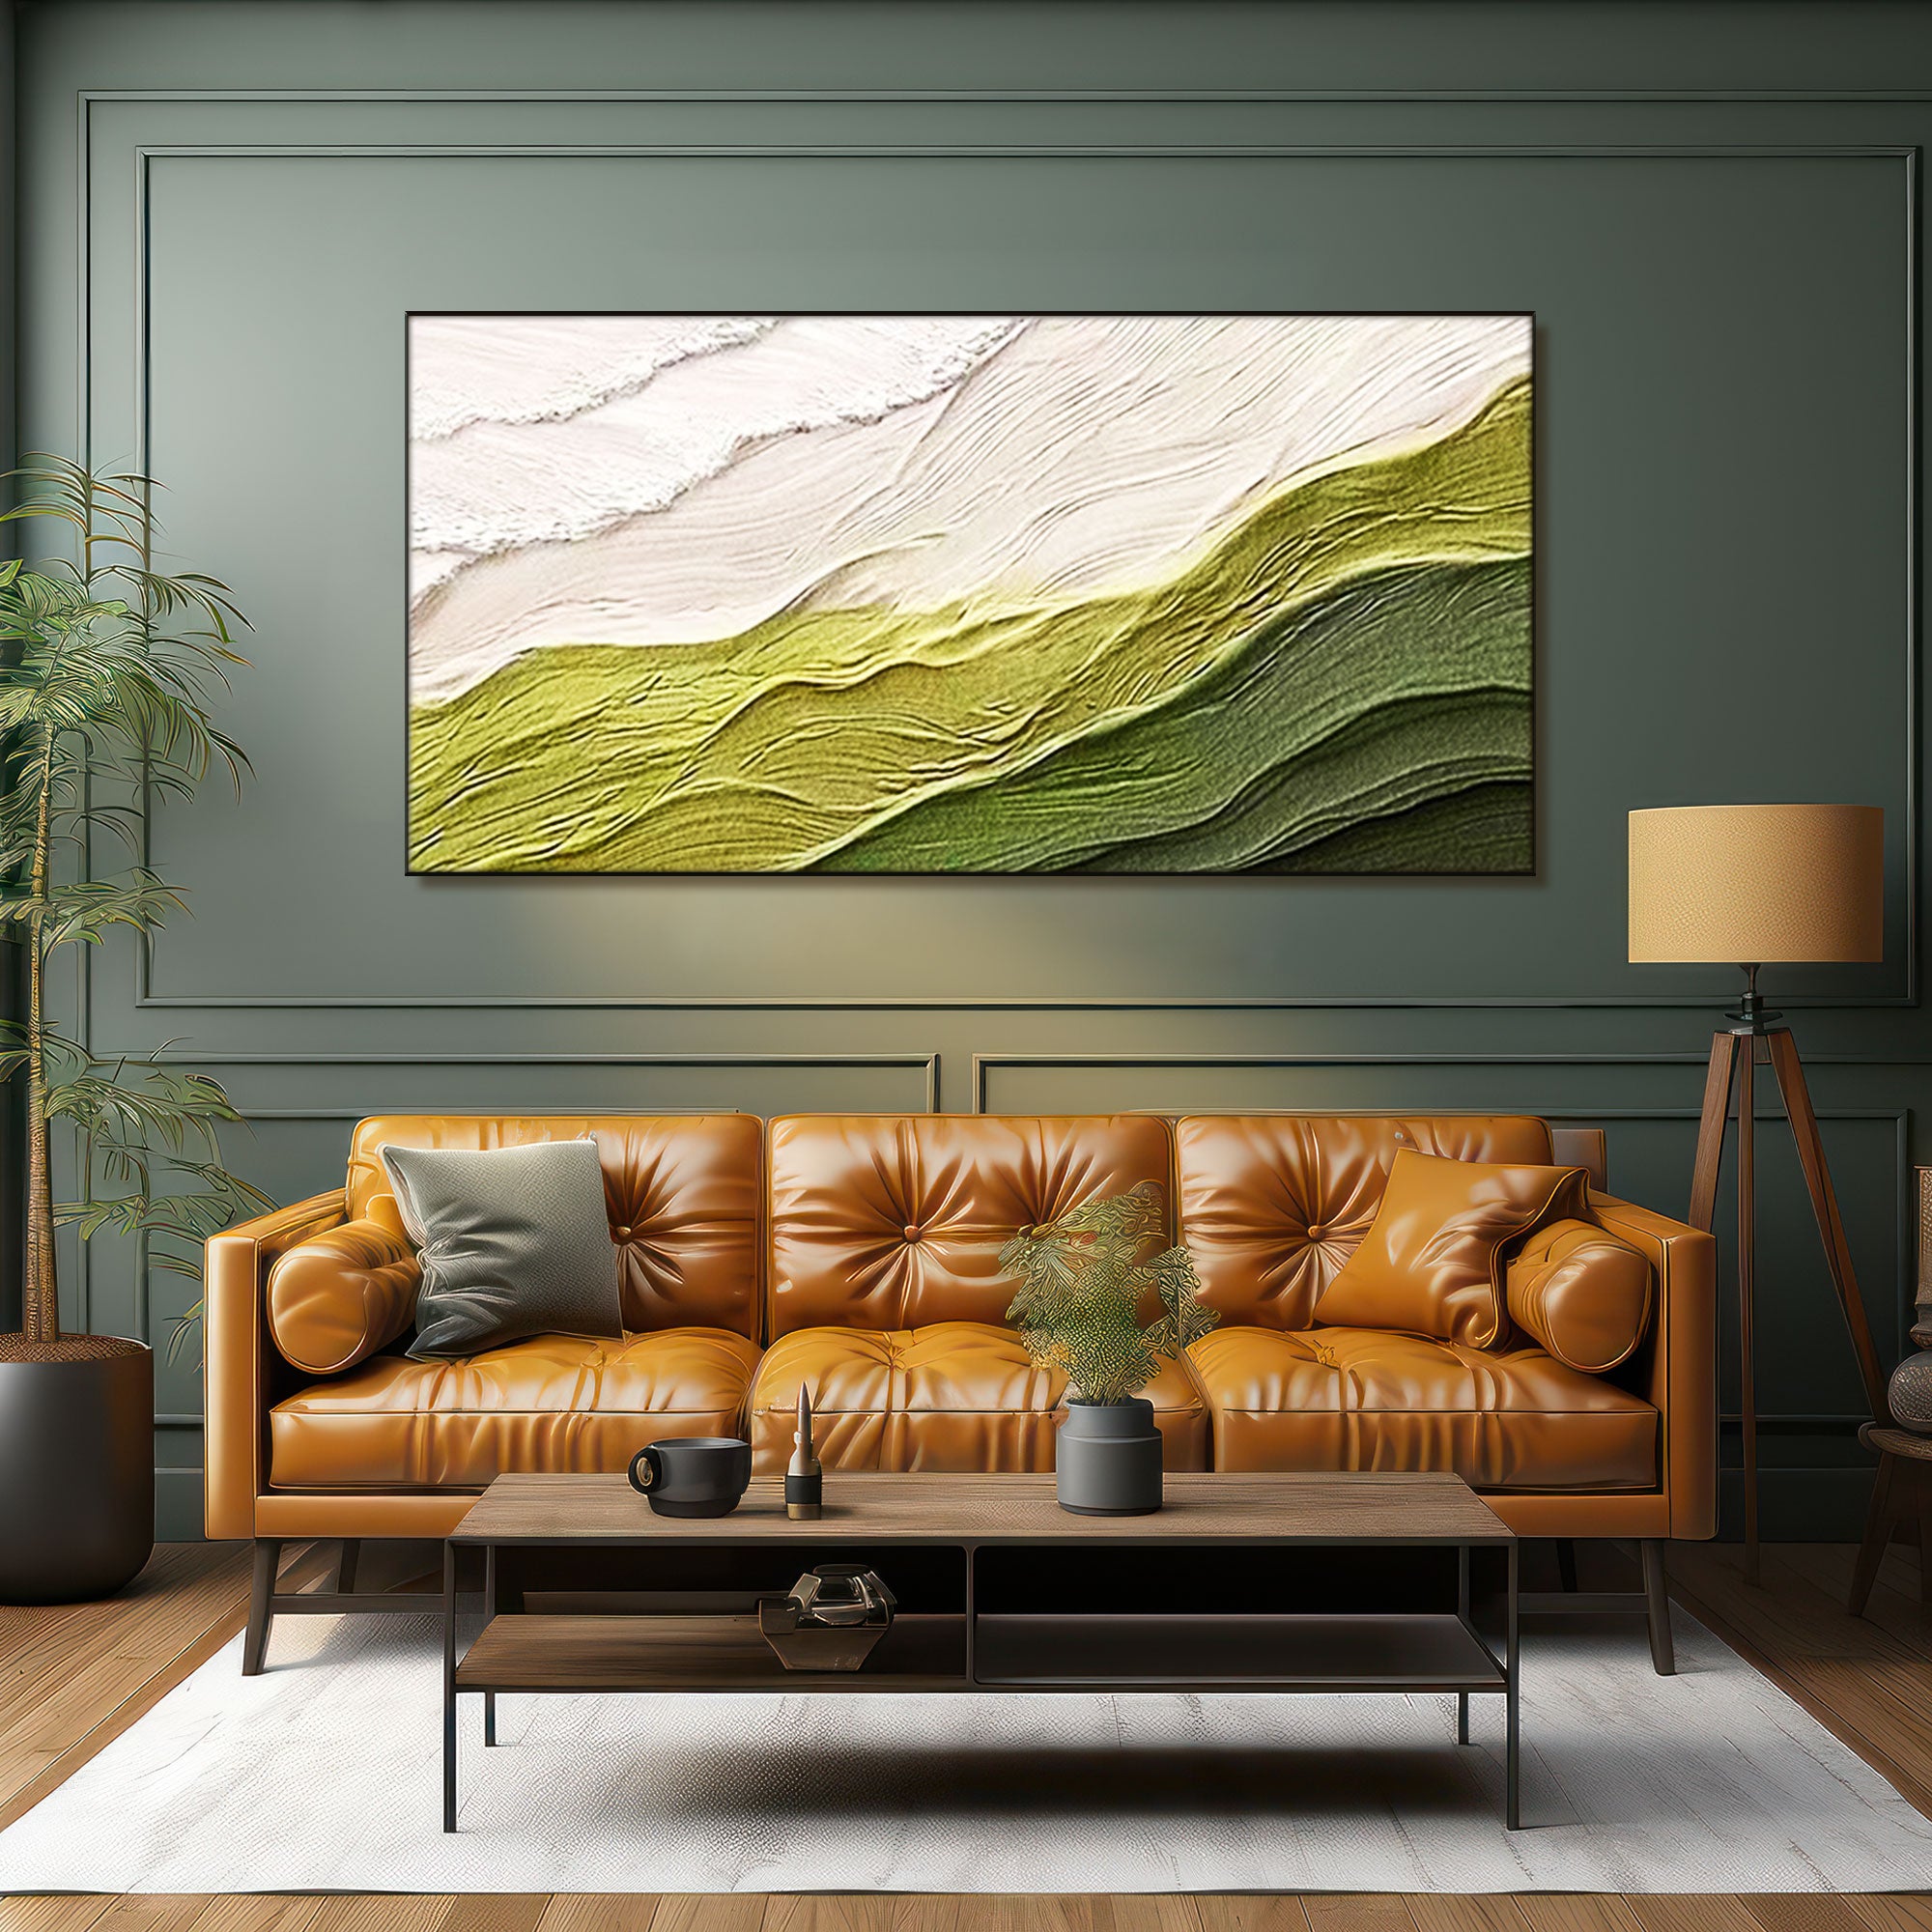 3D Textured Art On Canvas Green Abstract art Painting  "Verdant Whispers"